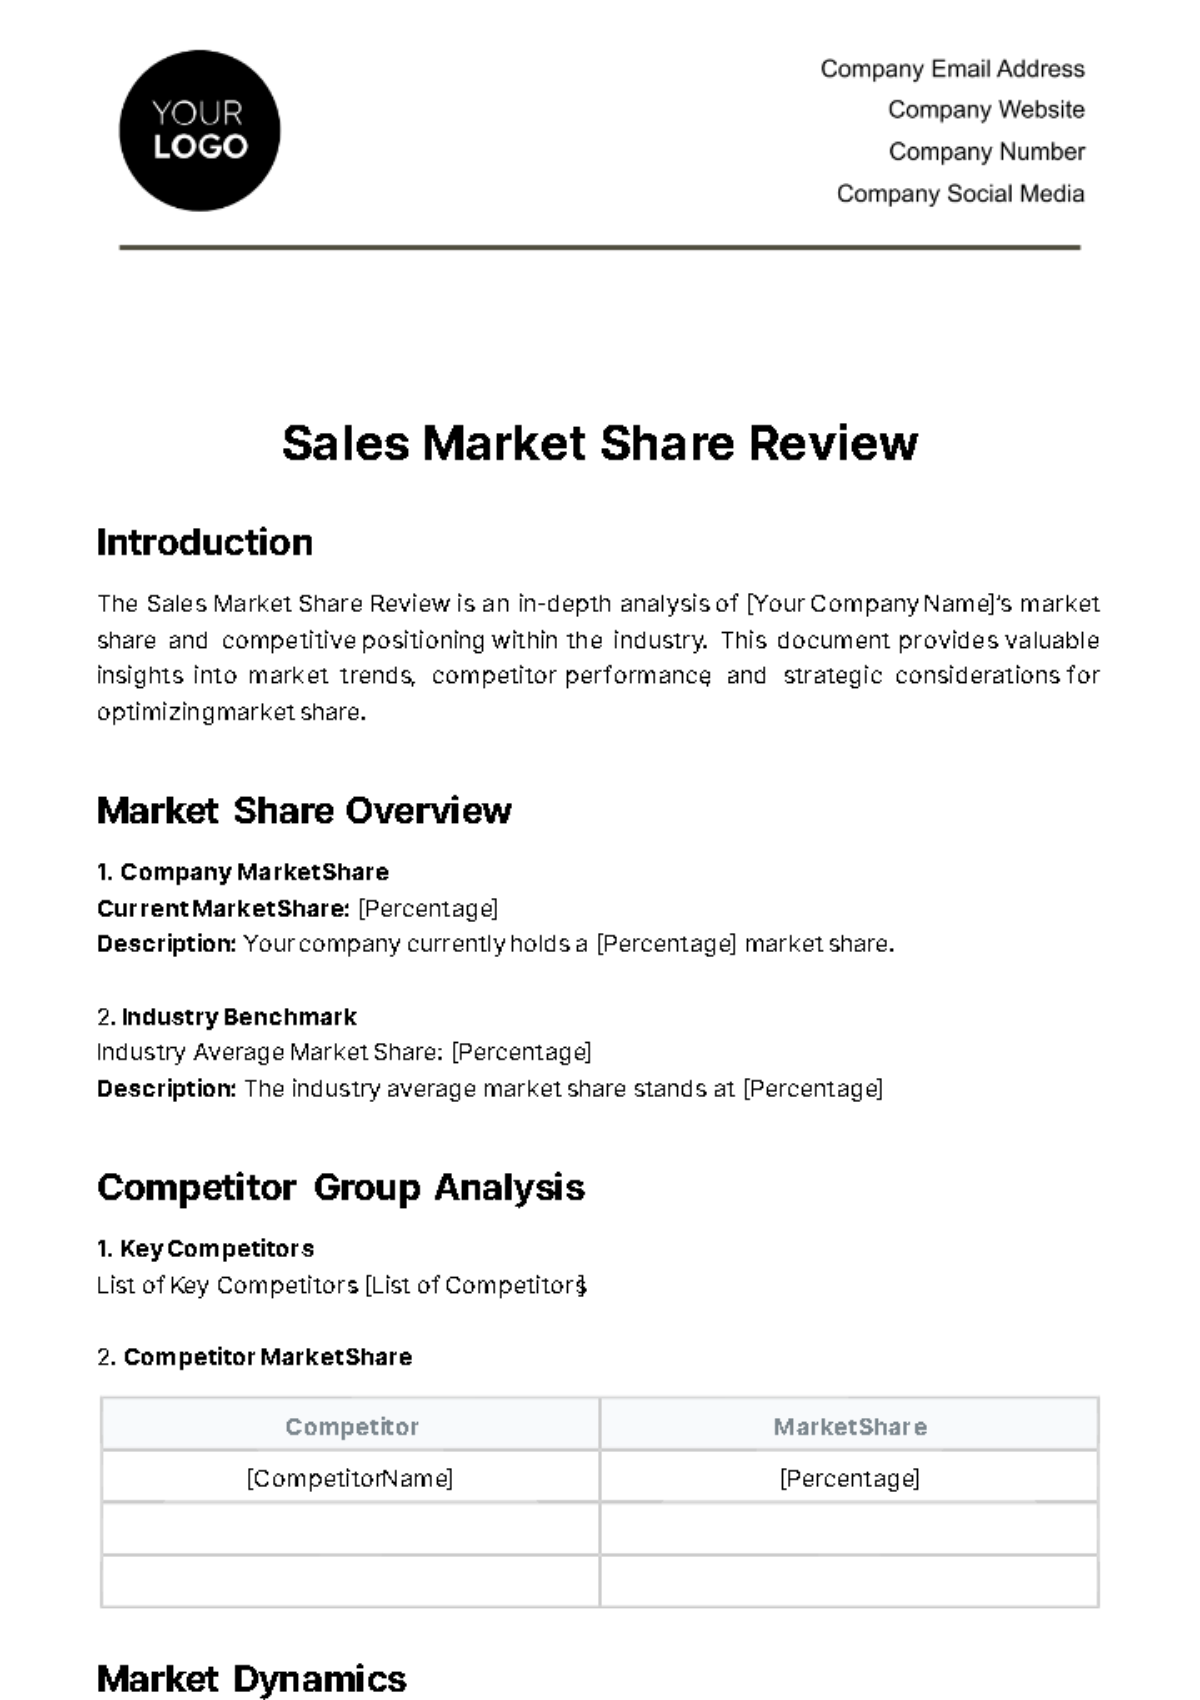 Sales Market Share Review Template